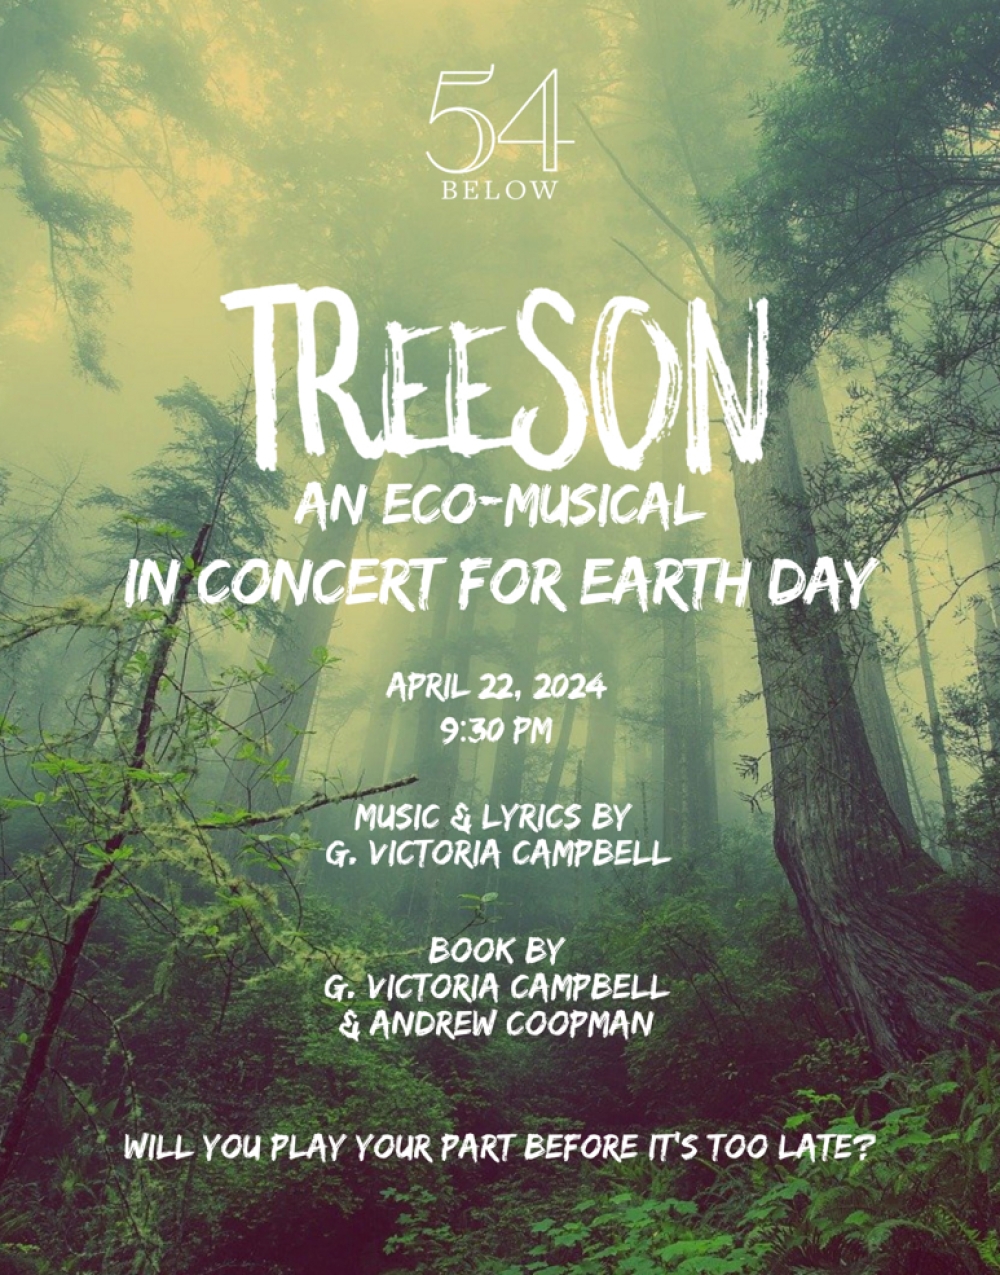 TREESON: An Eco-Musical in Concert for Earth Day - 54 Below Stage Mag